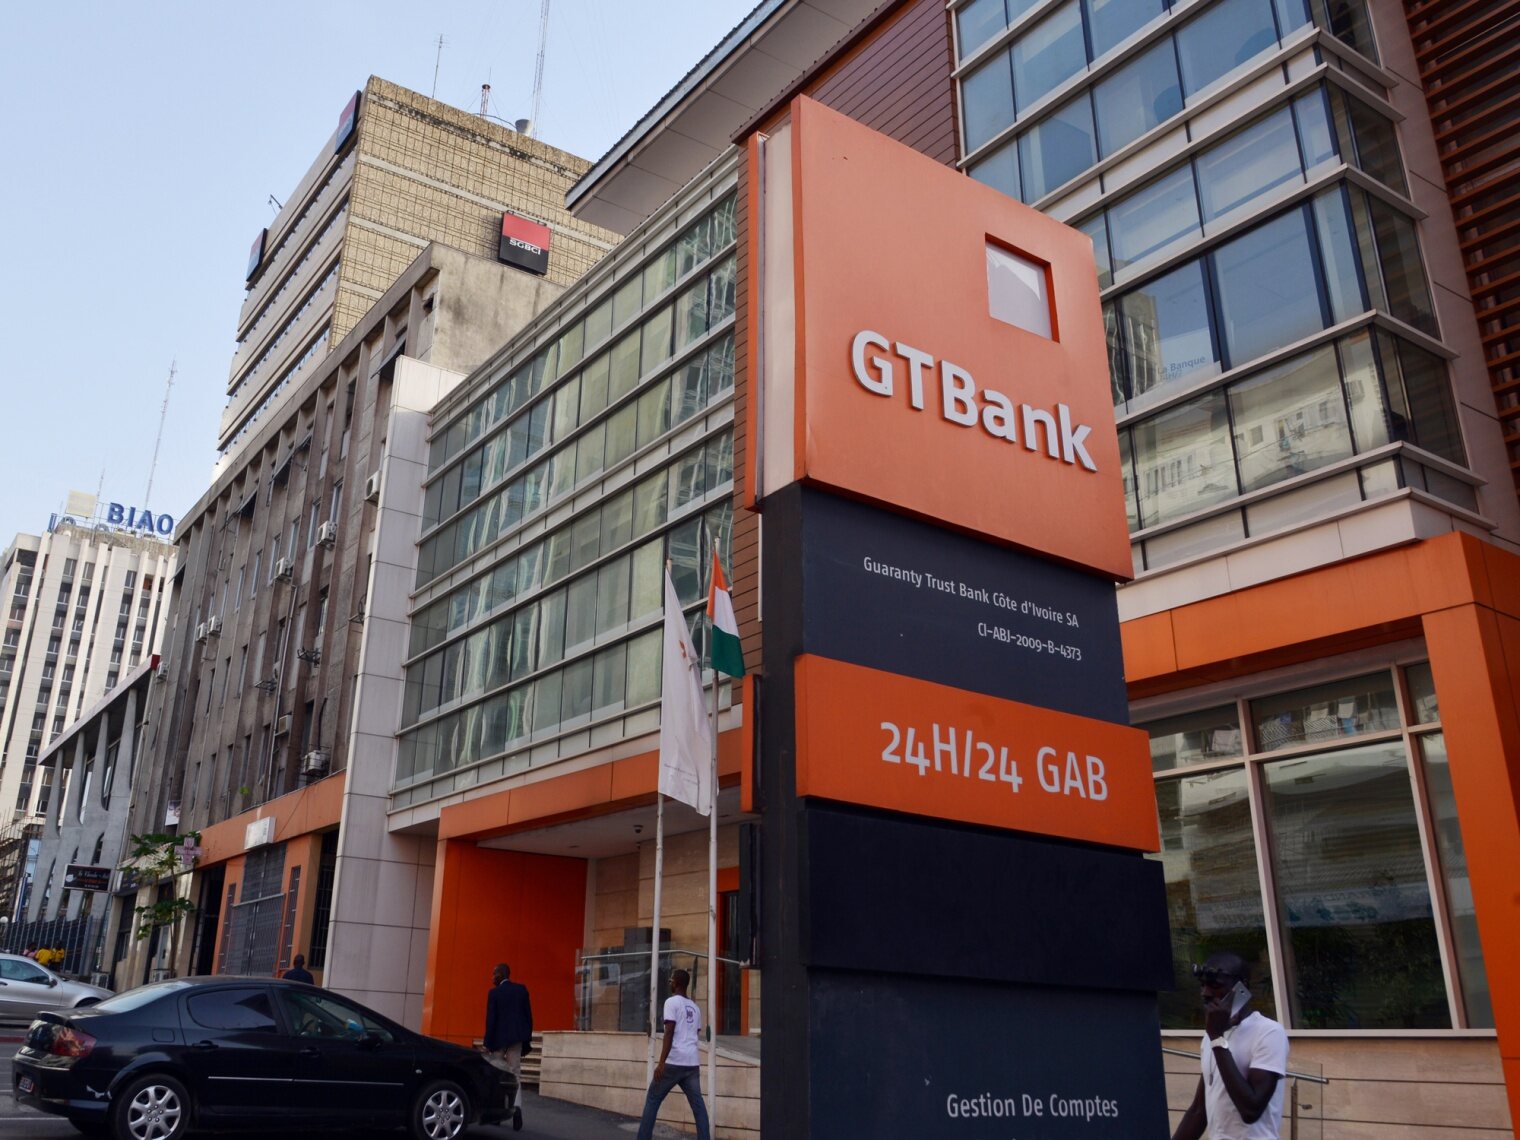 17-astonishing-facts-about-guaranty-trust-bank